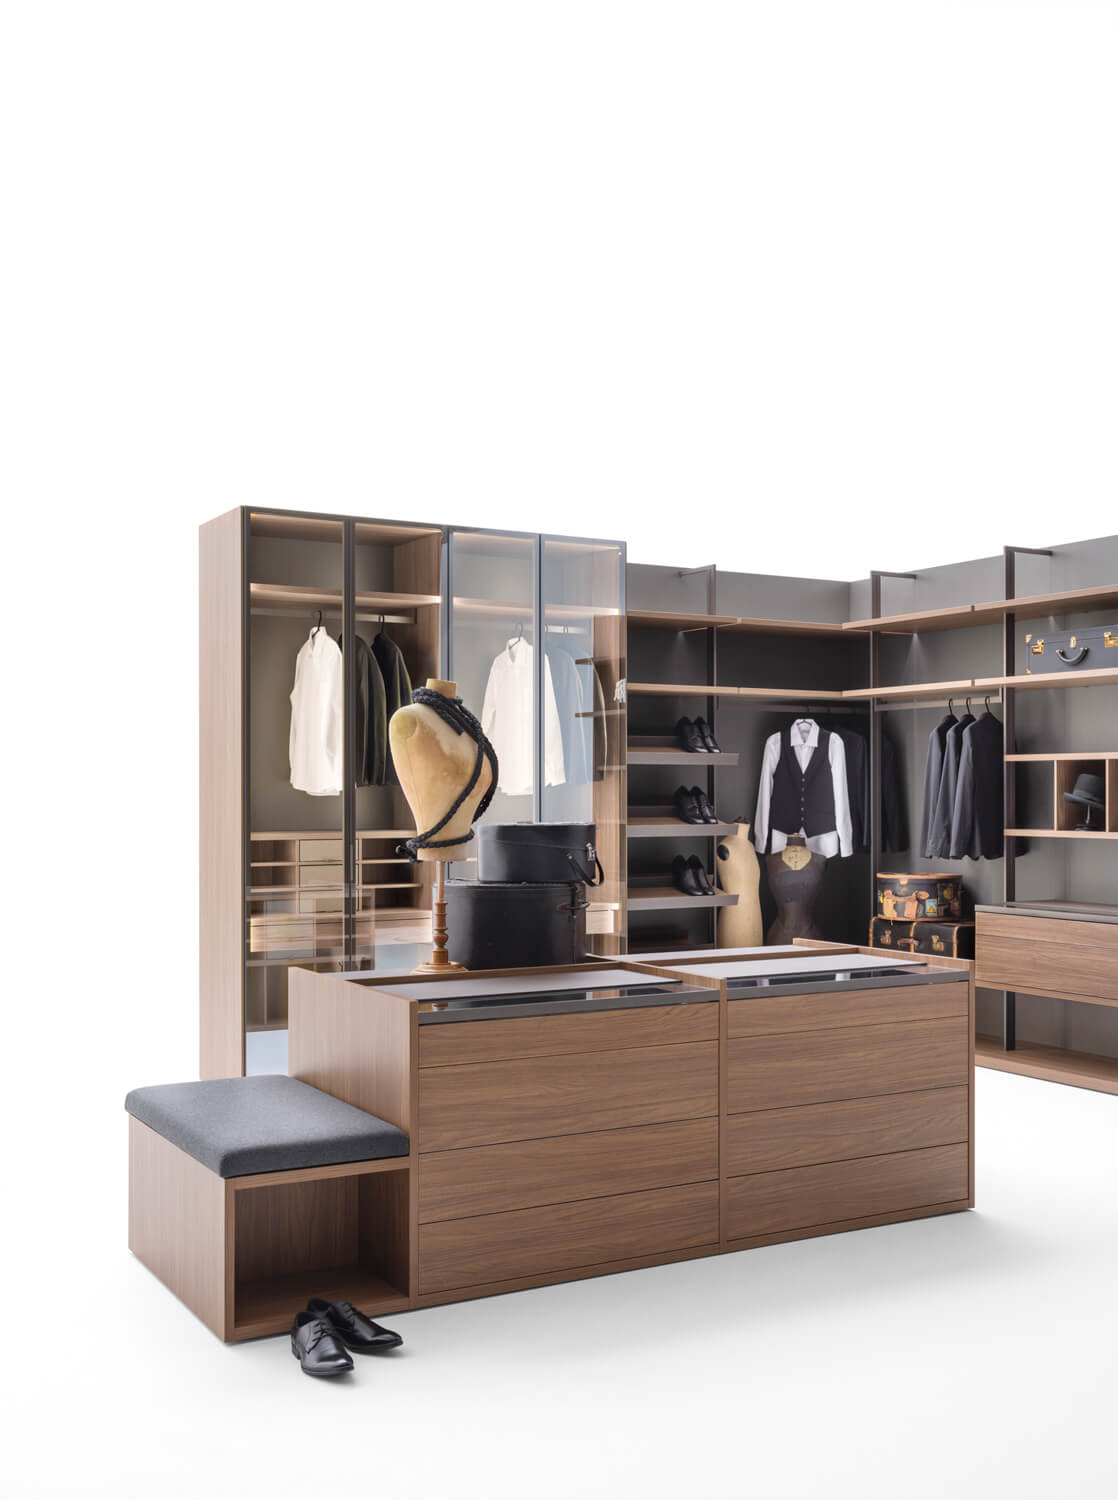 The Cabina luxury walk-in closet system features an open top. Pair it with Core modules with solid and framed glass doors. The double-sided island unit is customizable with glass-top drawers, open elements, leather inserts, and integrated stools. Shown: Easy Walnut veneer and piqué melamine finishes. 